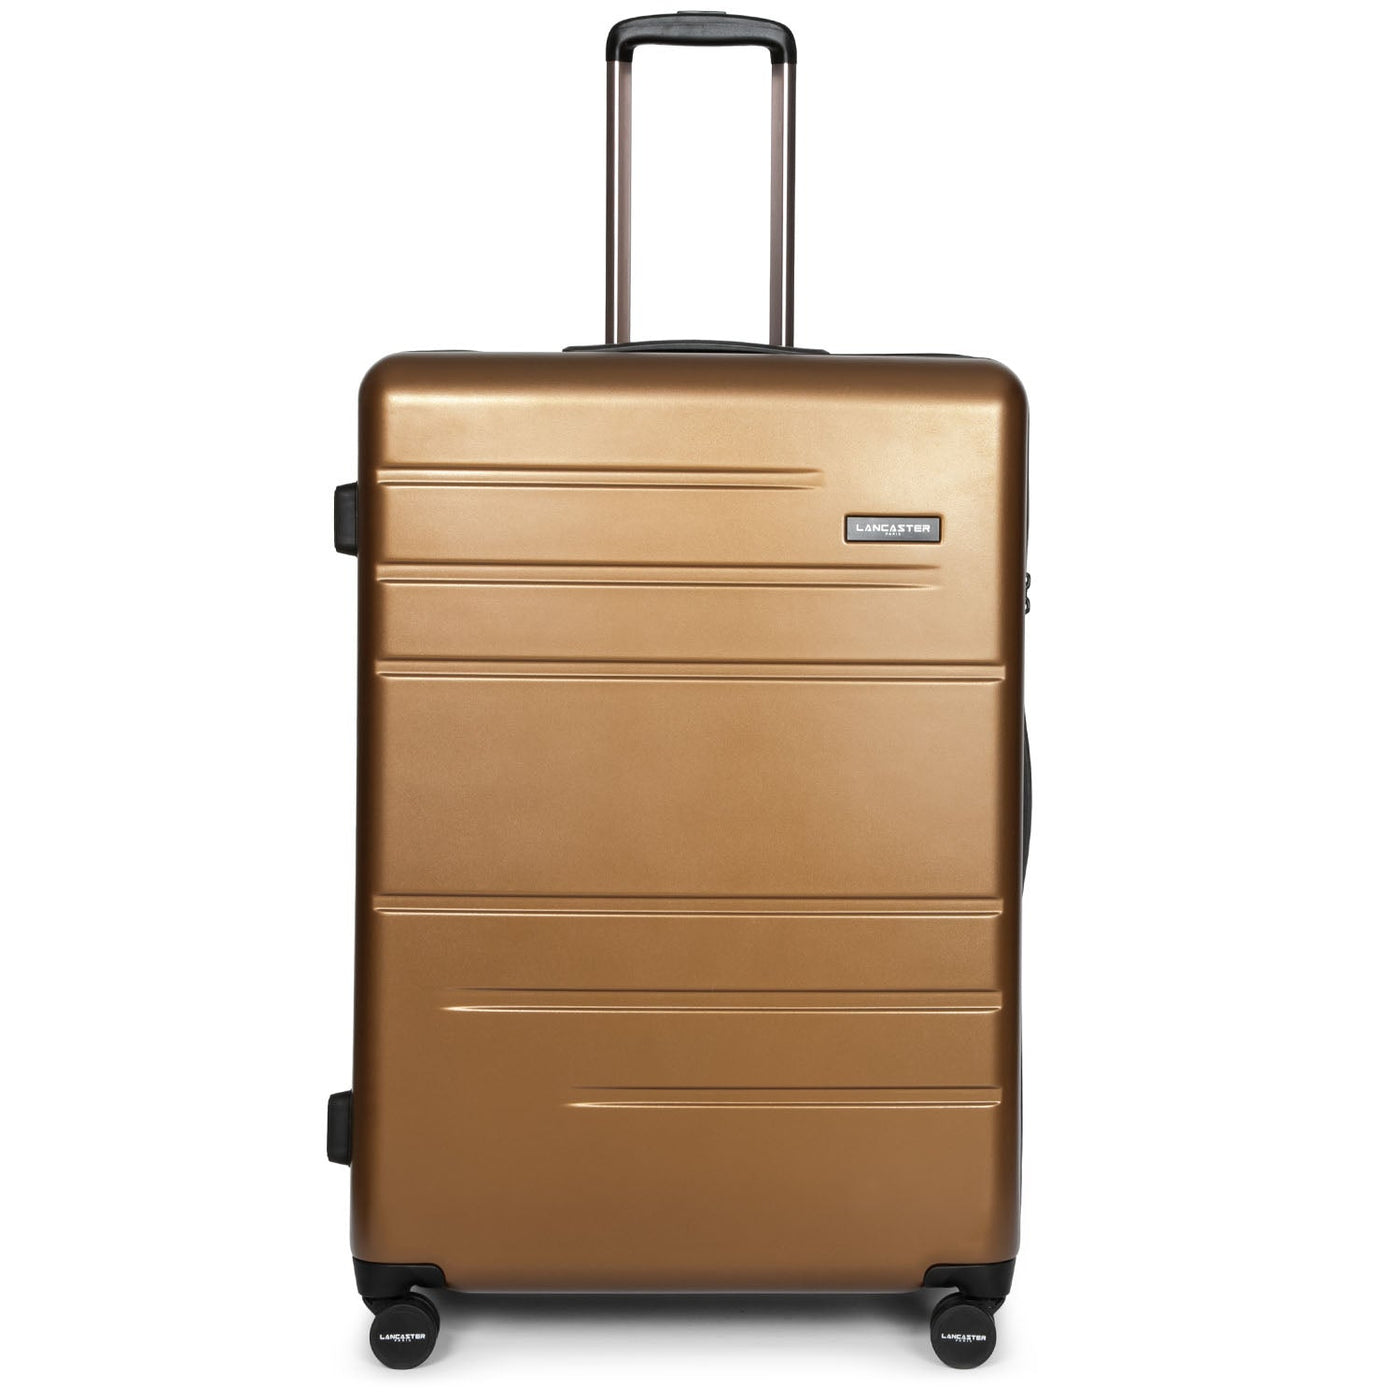 assortment of 3 luggage - luggage #couleur_bronze